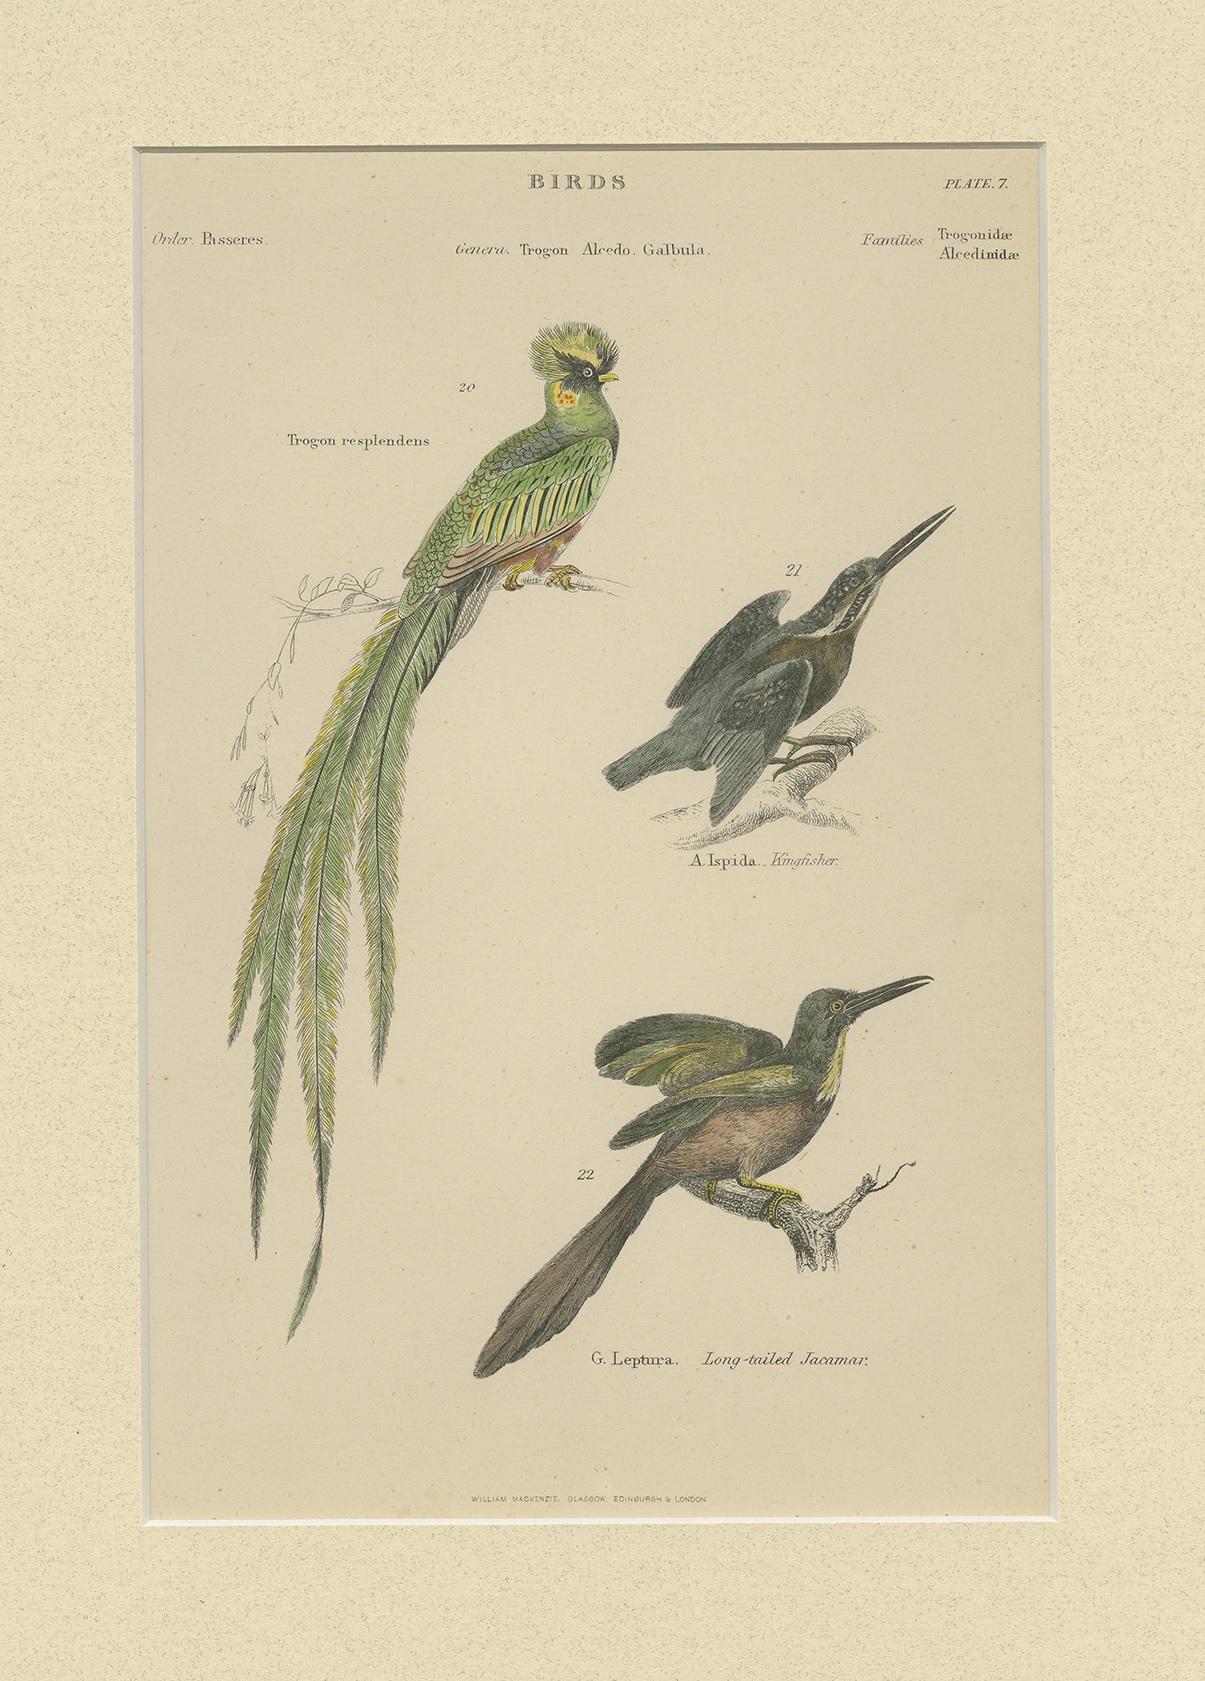 Antique print titled 'Birds'. Print of various birds including the trogon, kingfisher and jacamar. This print originates from 'The Museum of Natural History' by John Richardson. Published by William Mackenzie.

Passepartout included.